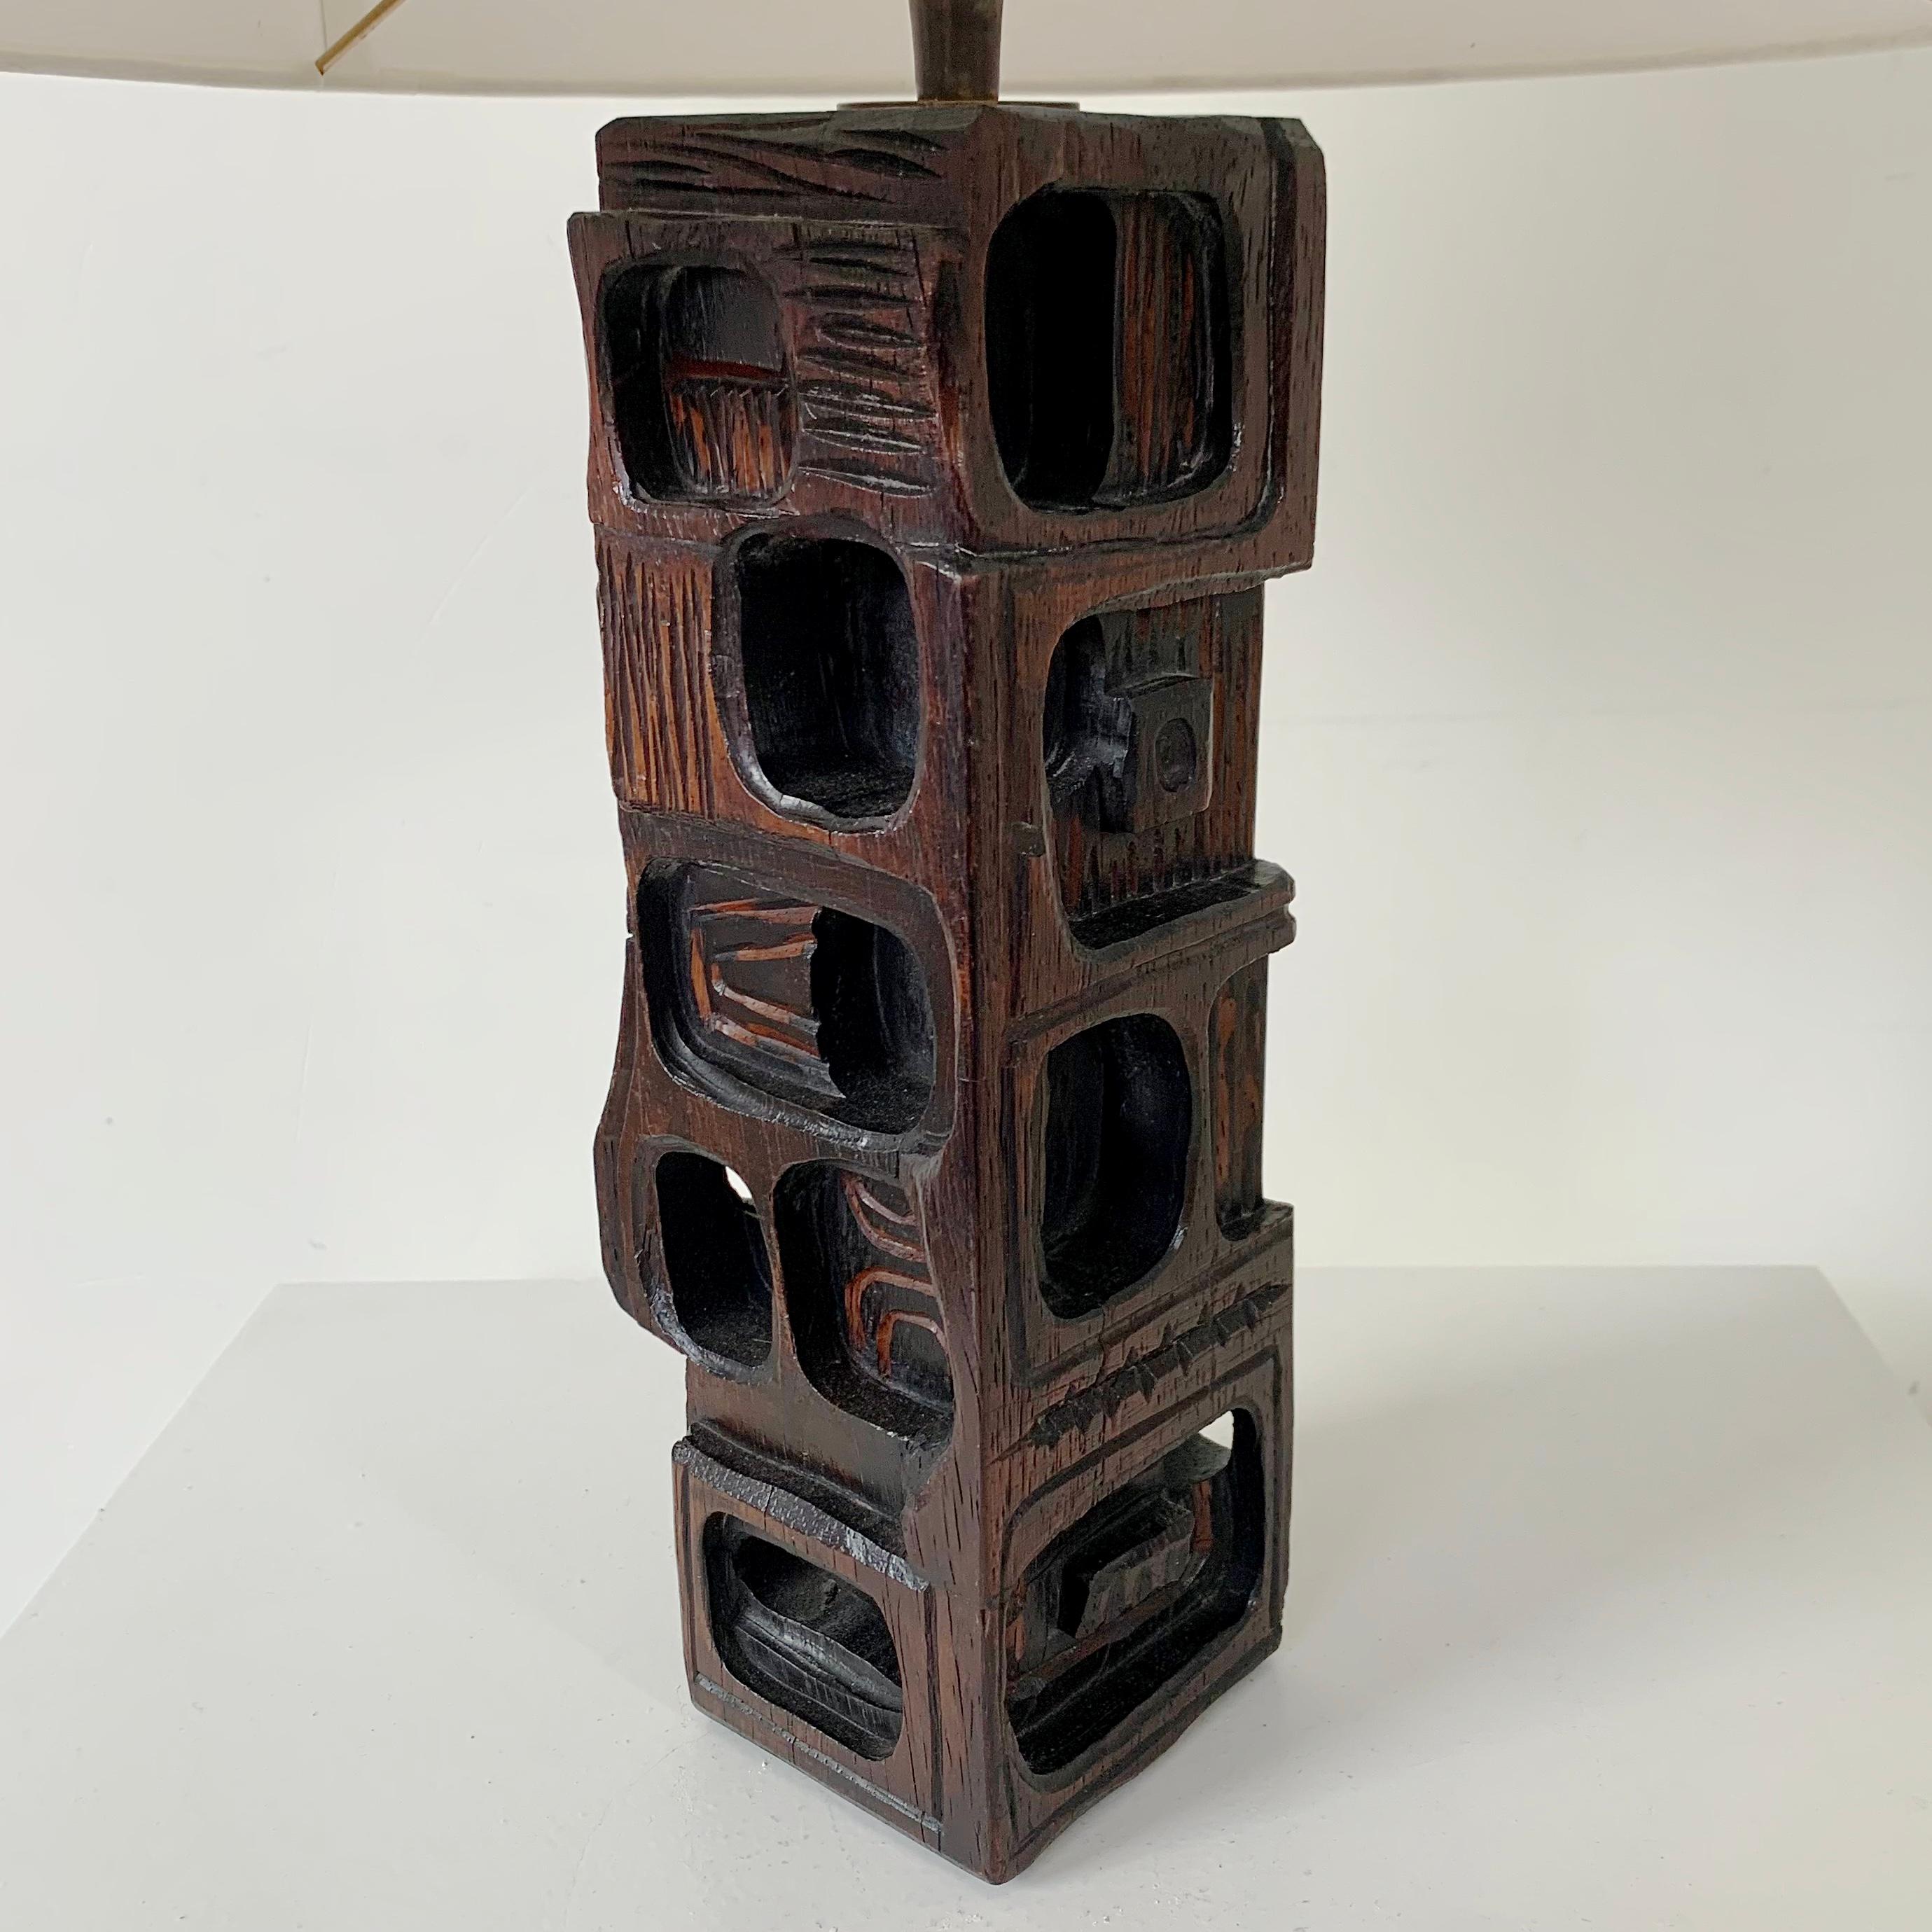 Late 20th Century Sculptural Hand Carved Table Lamp by Gianni Pinna, c.1970, Italy.